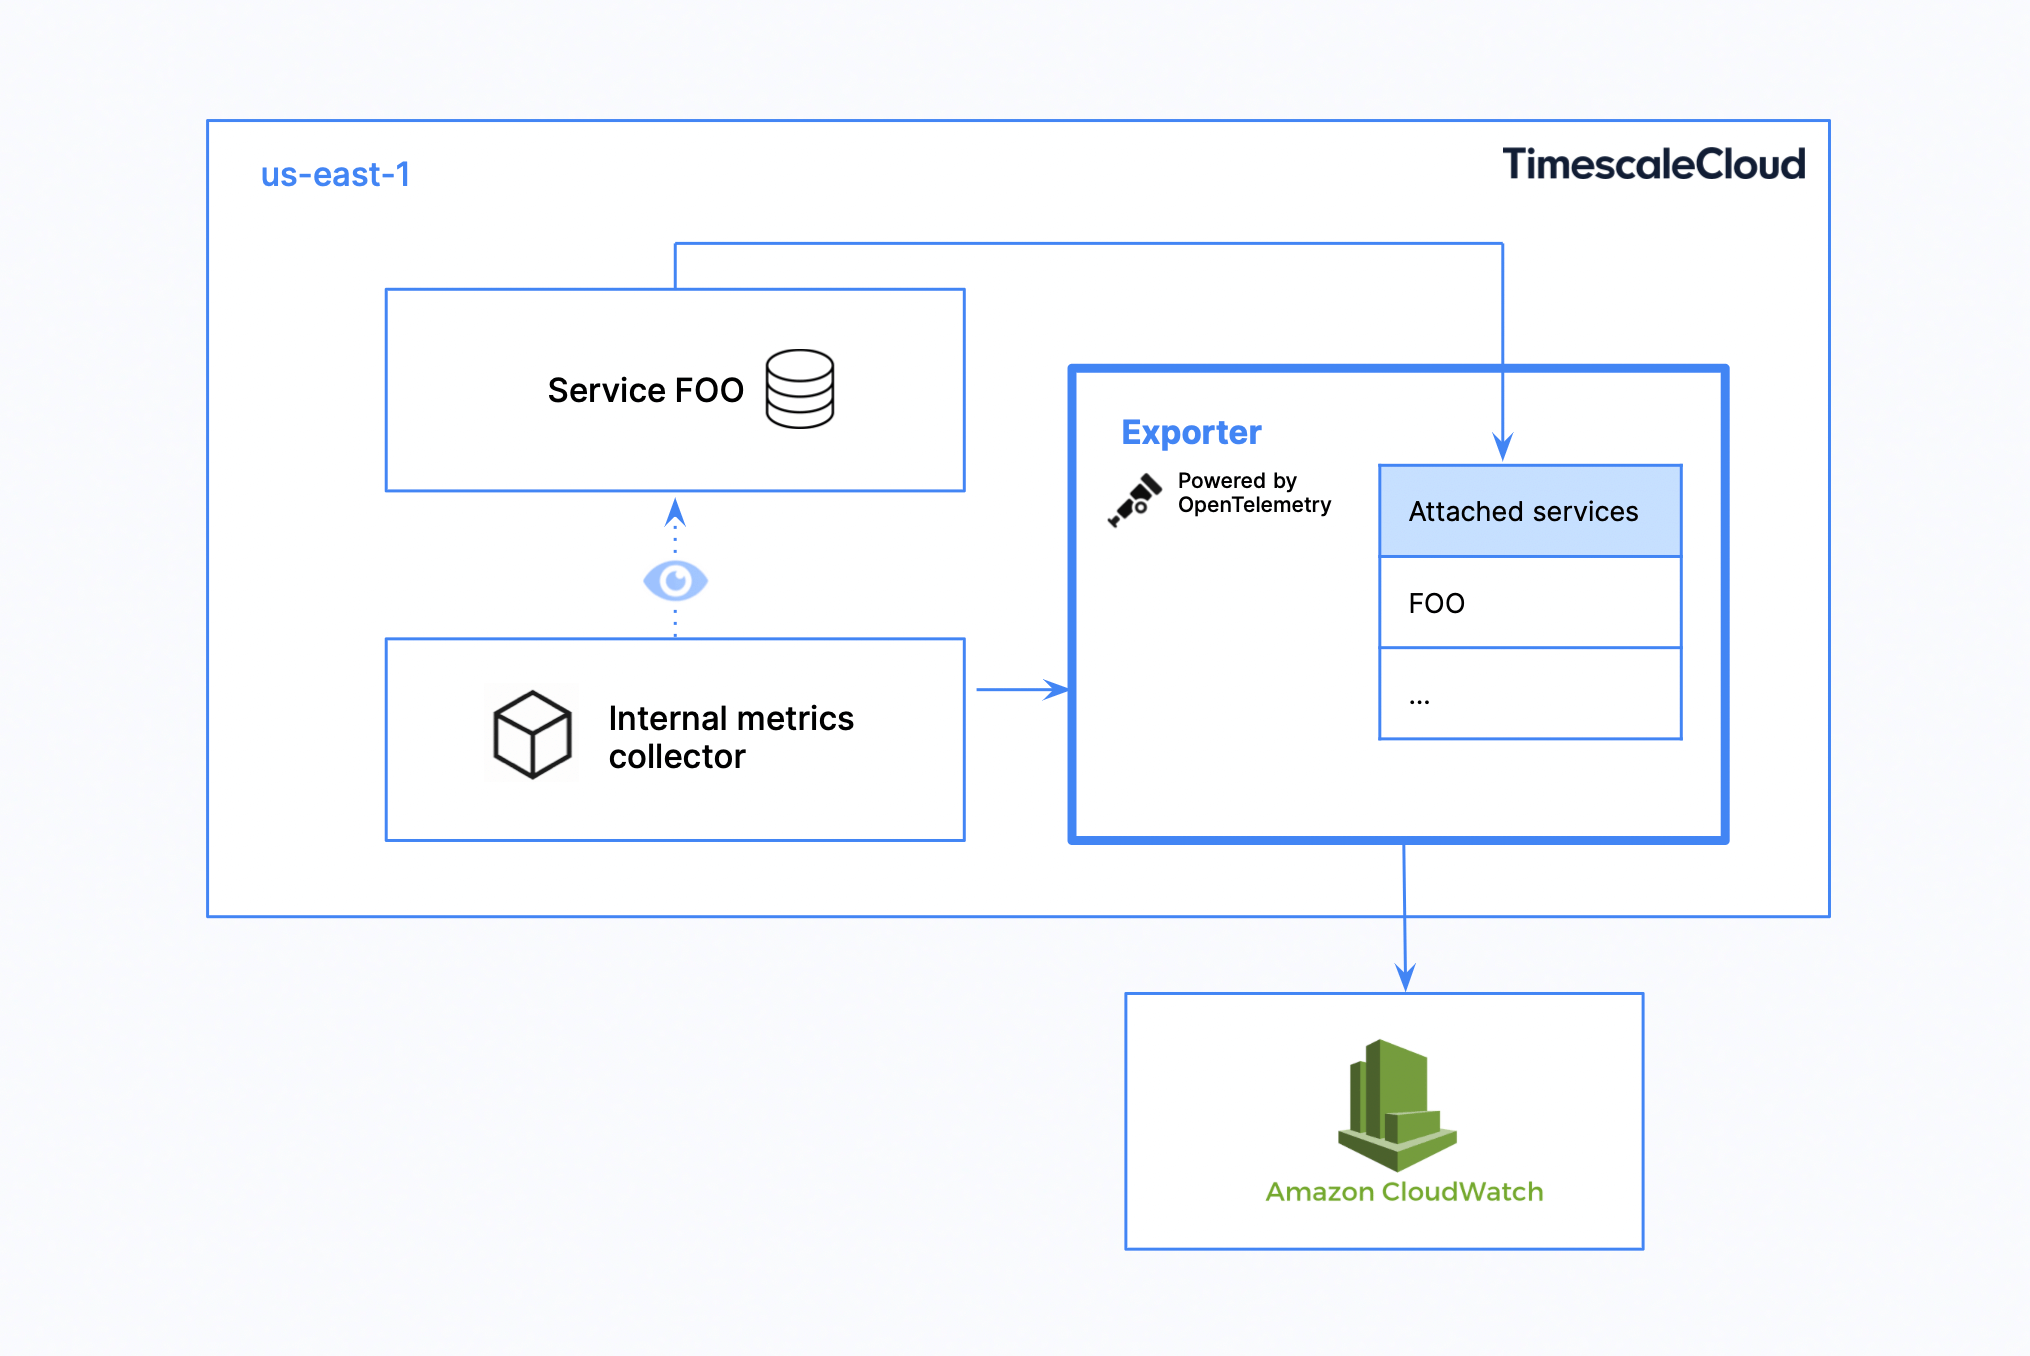 Architecture diagram showcasing the basic integration elements between Timescale Cloud and Amazon CloudWatch